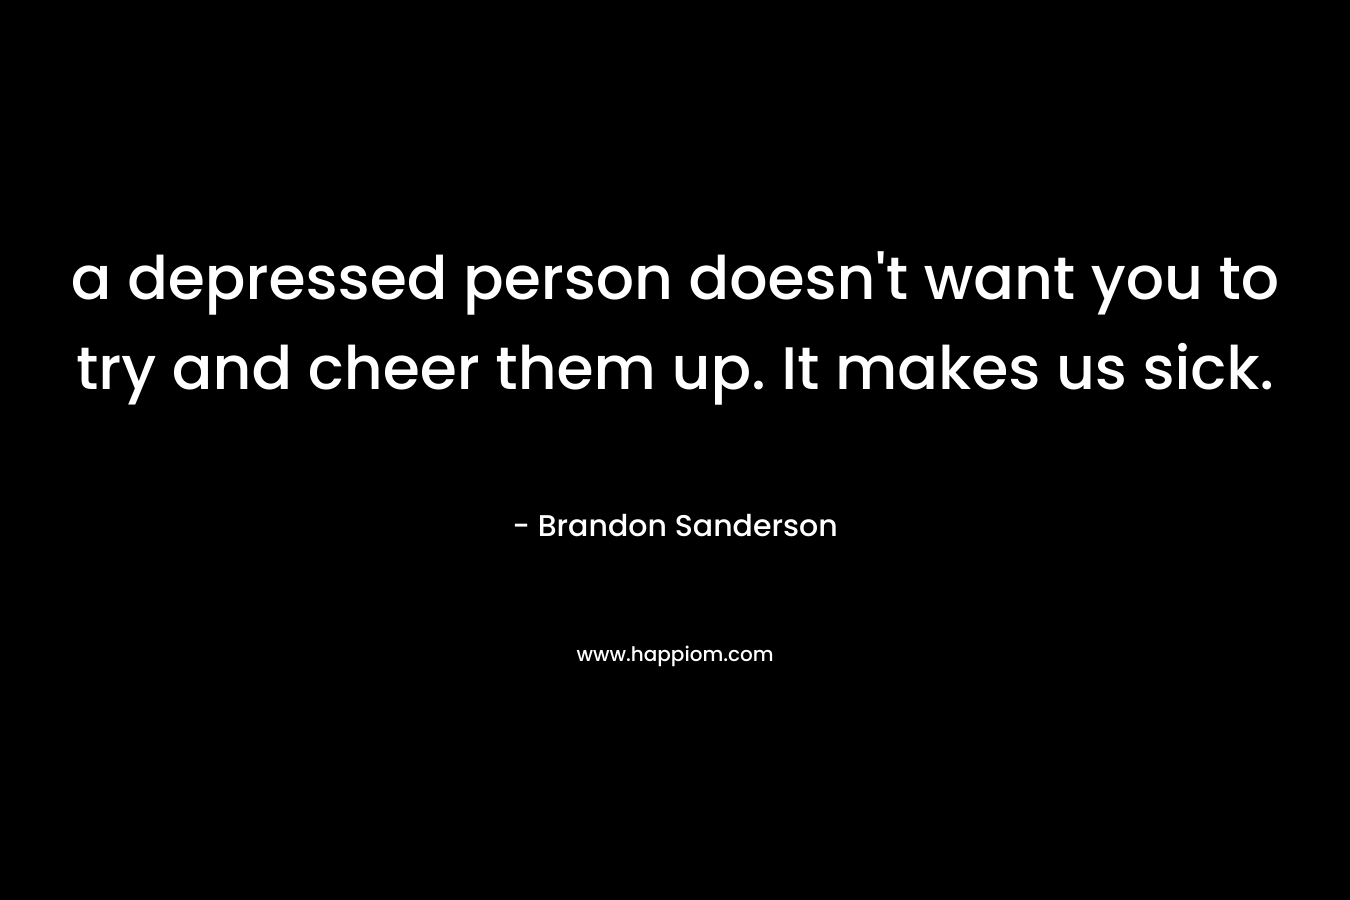 a depressed person doesn't want you to try and cheer them up. It makes us sick.